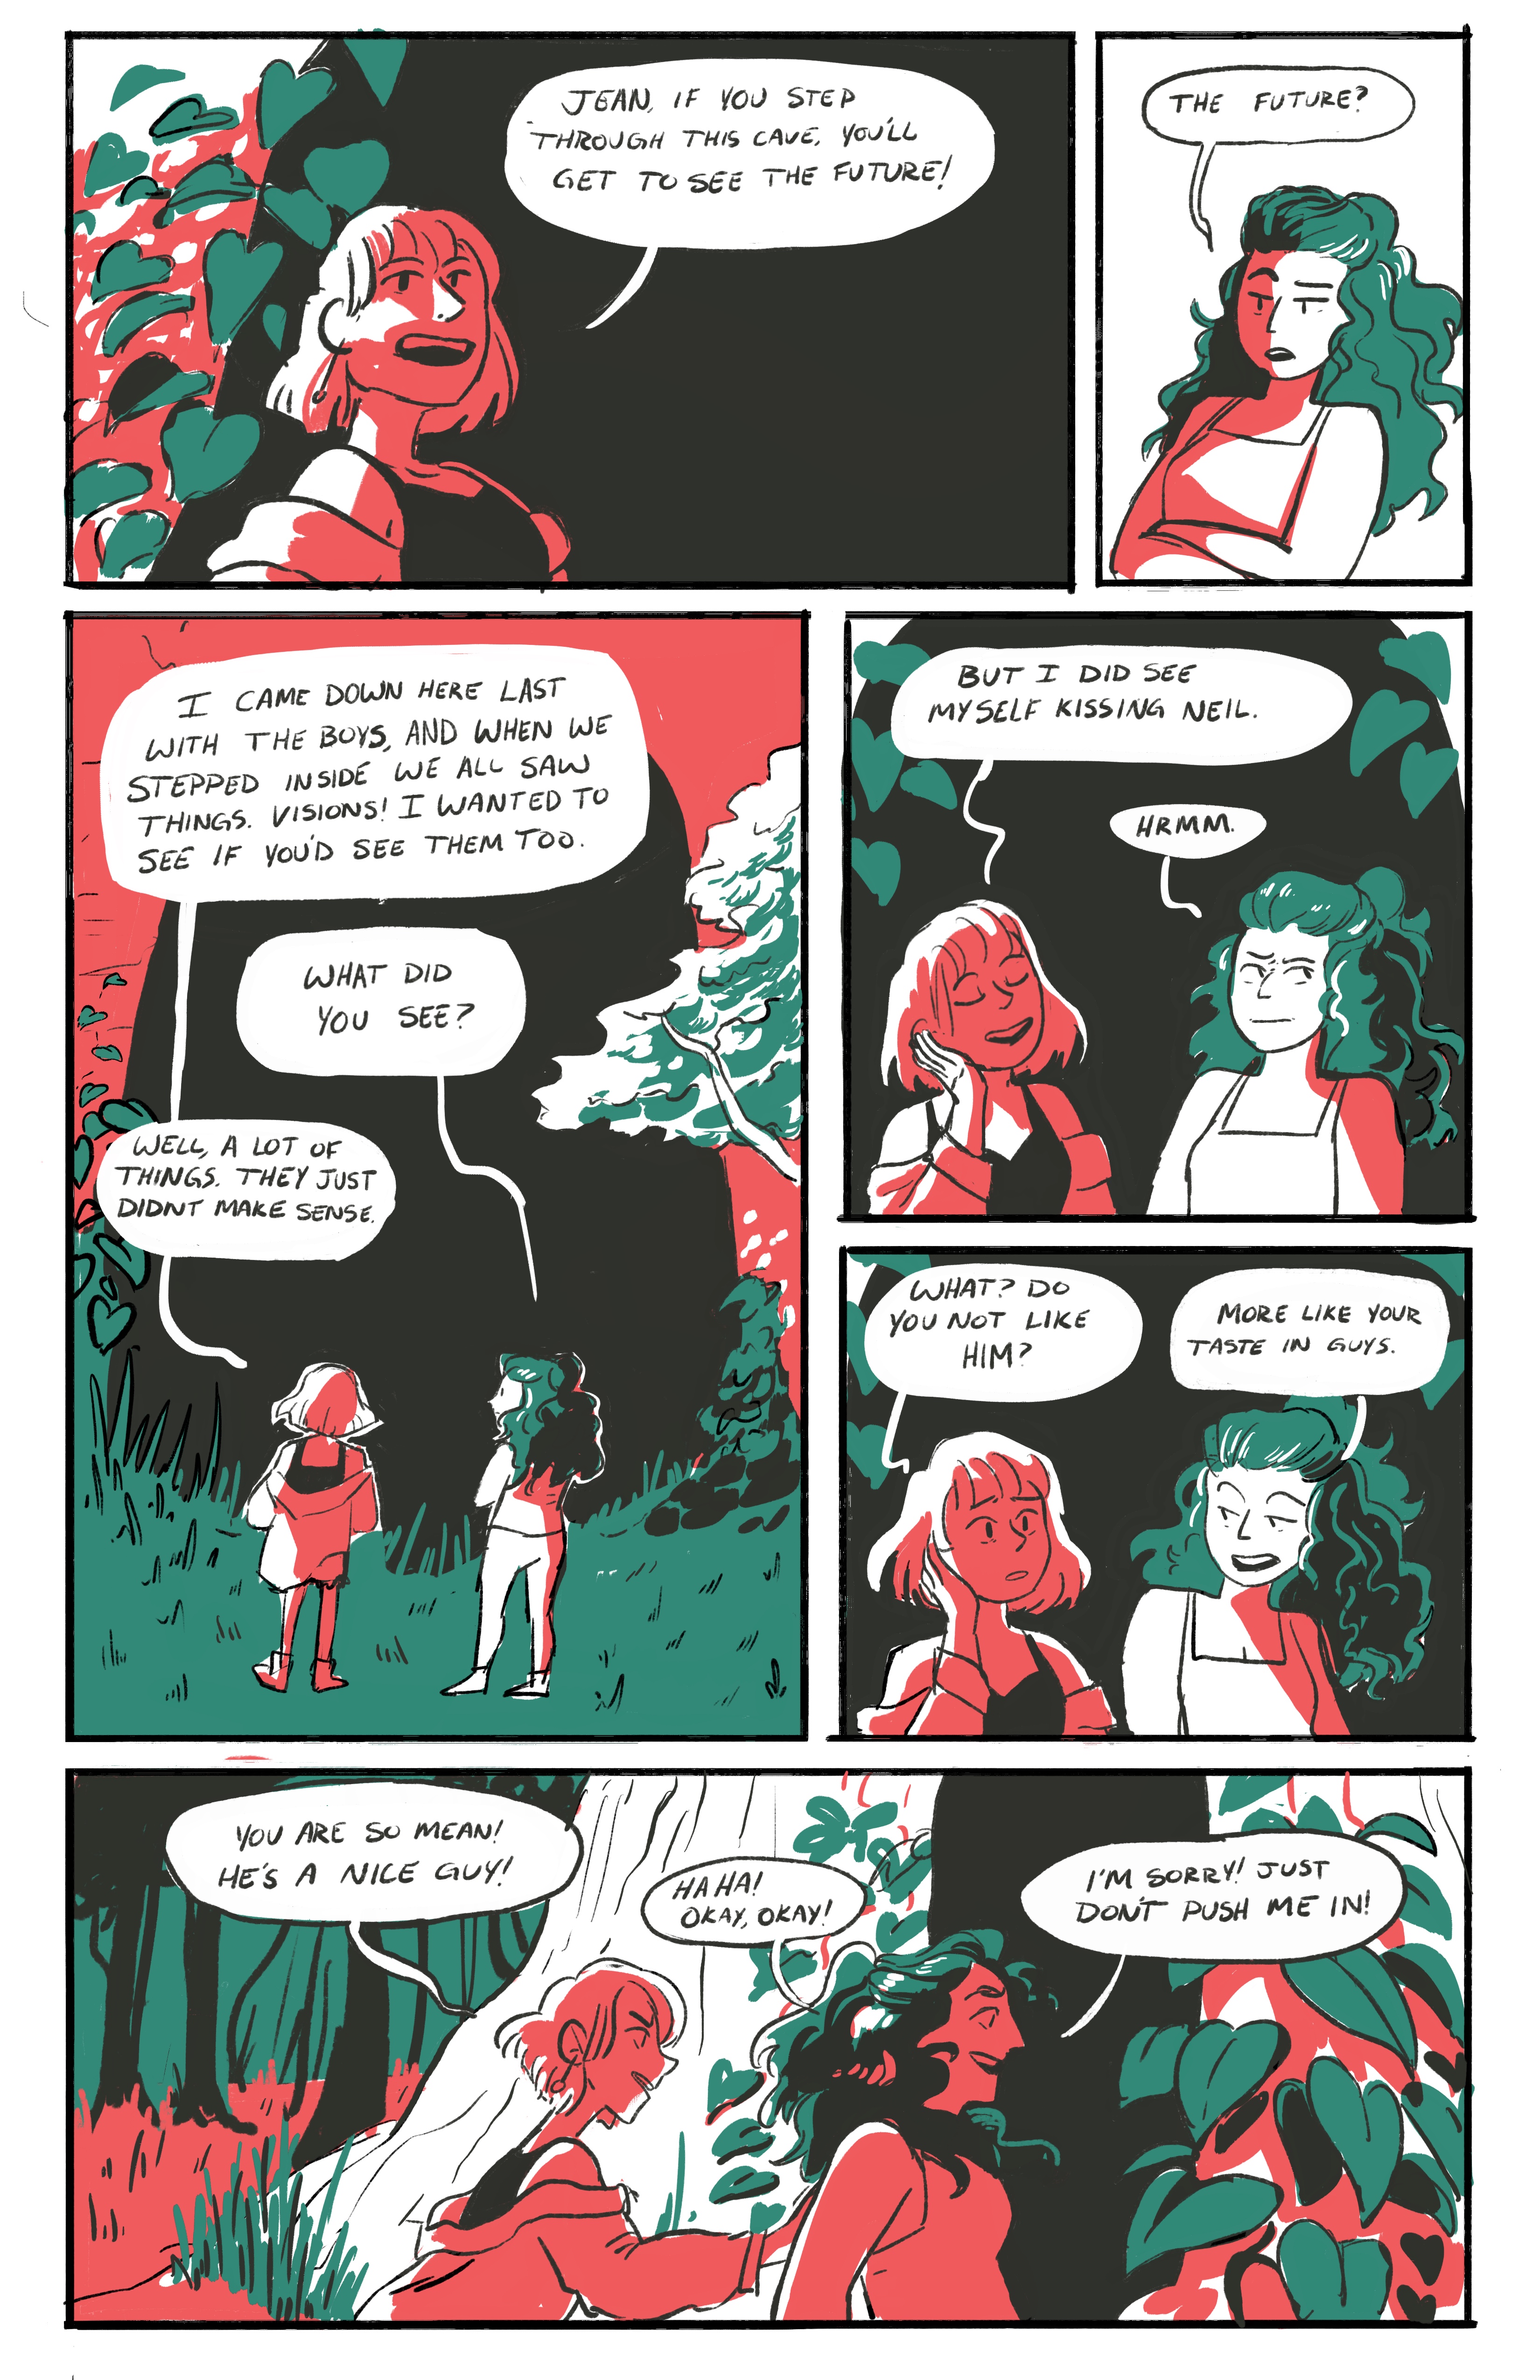 2 of 2 comic pages by Gaelen Elliott